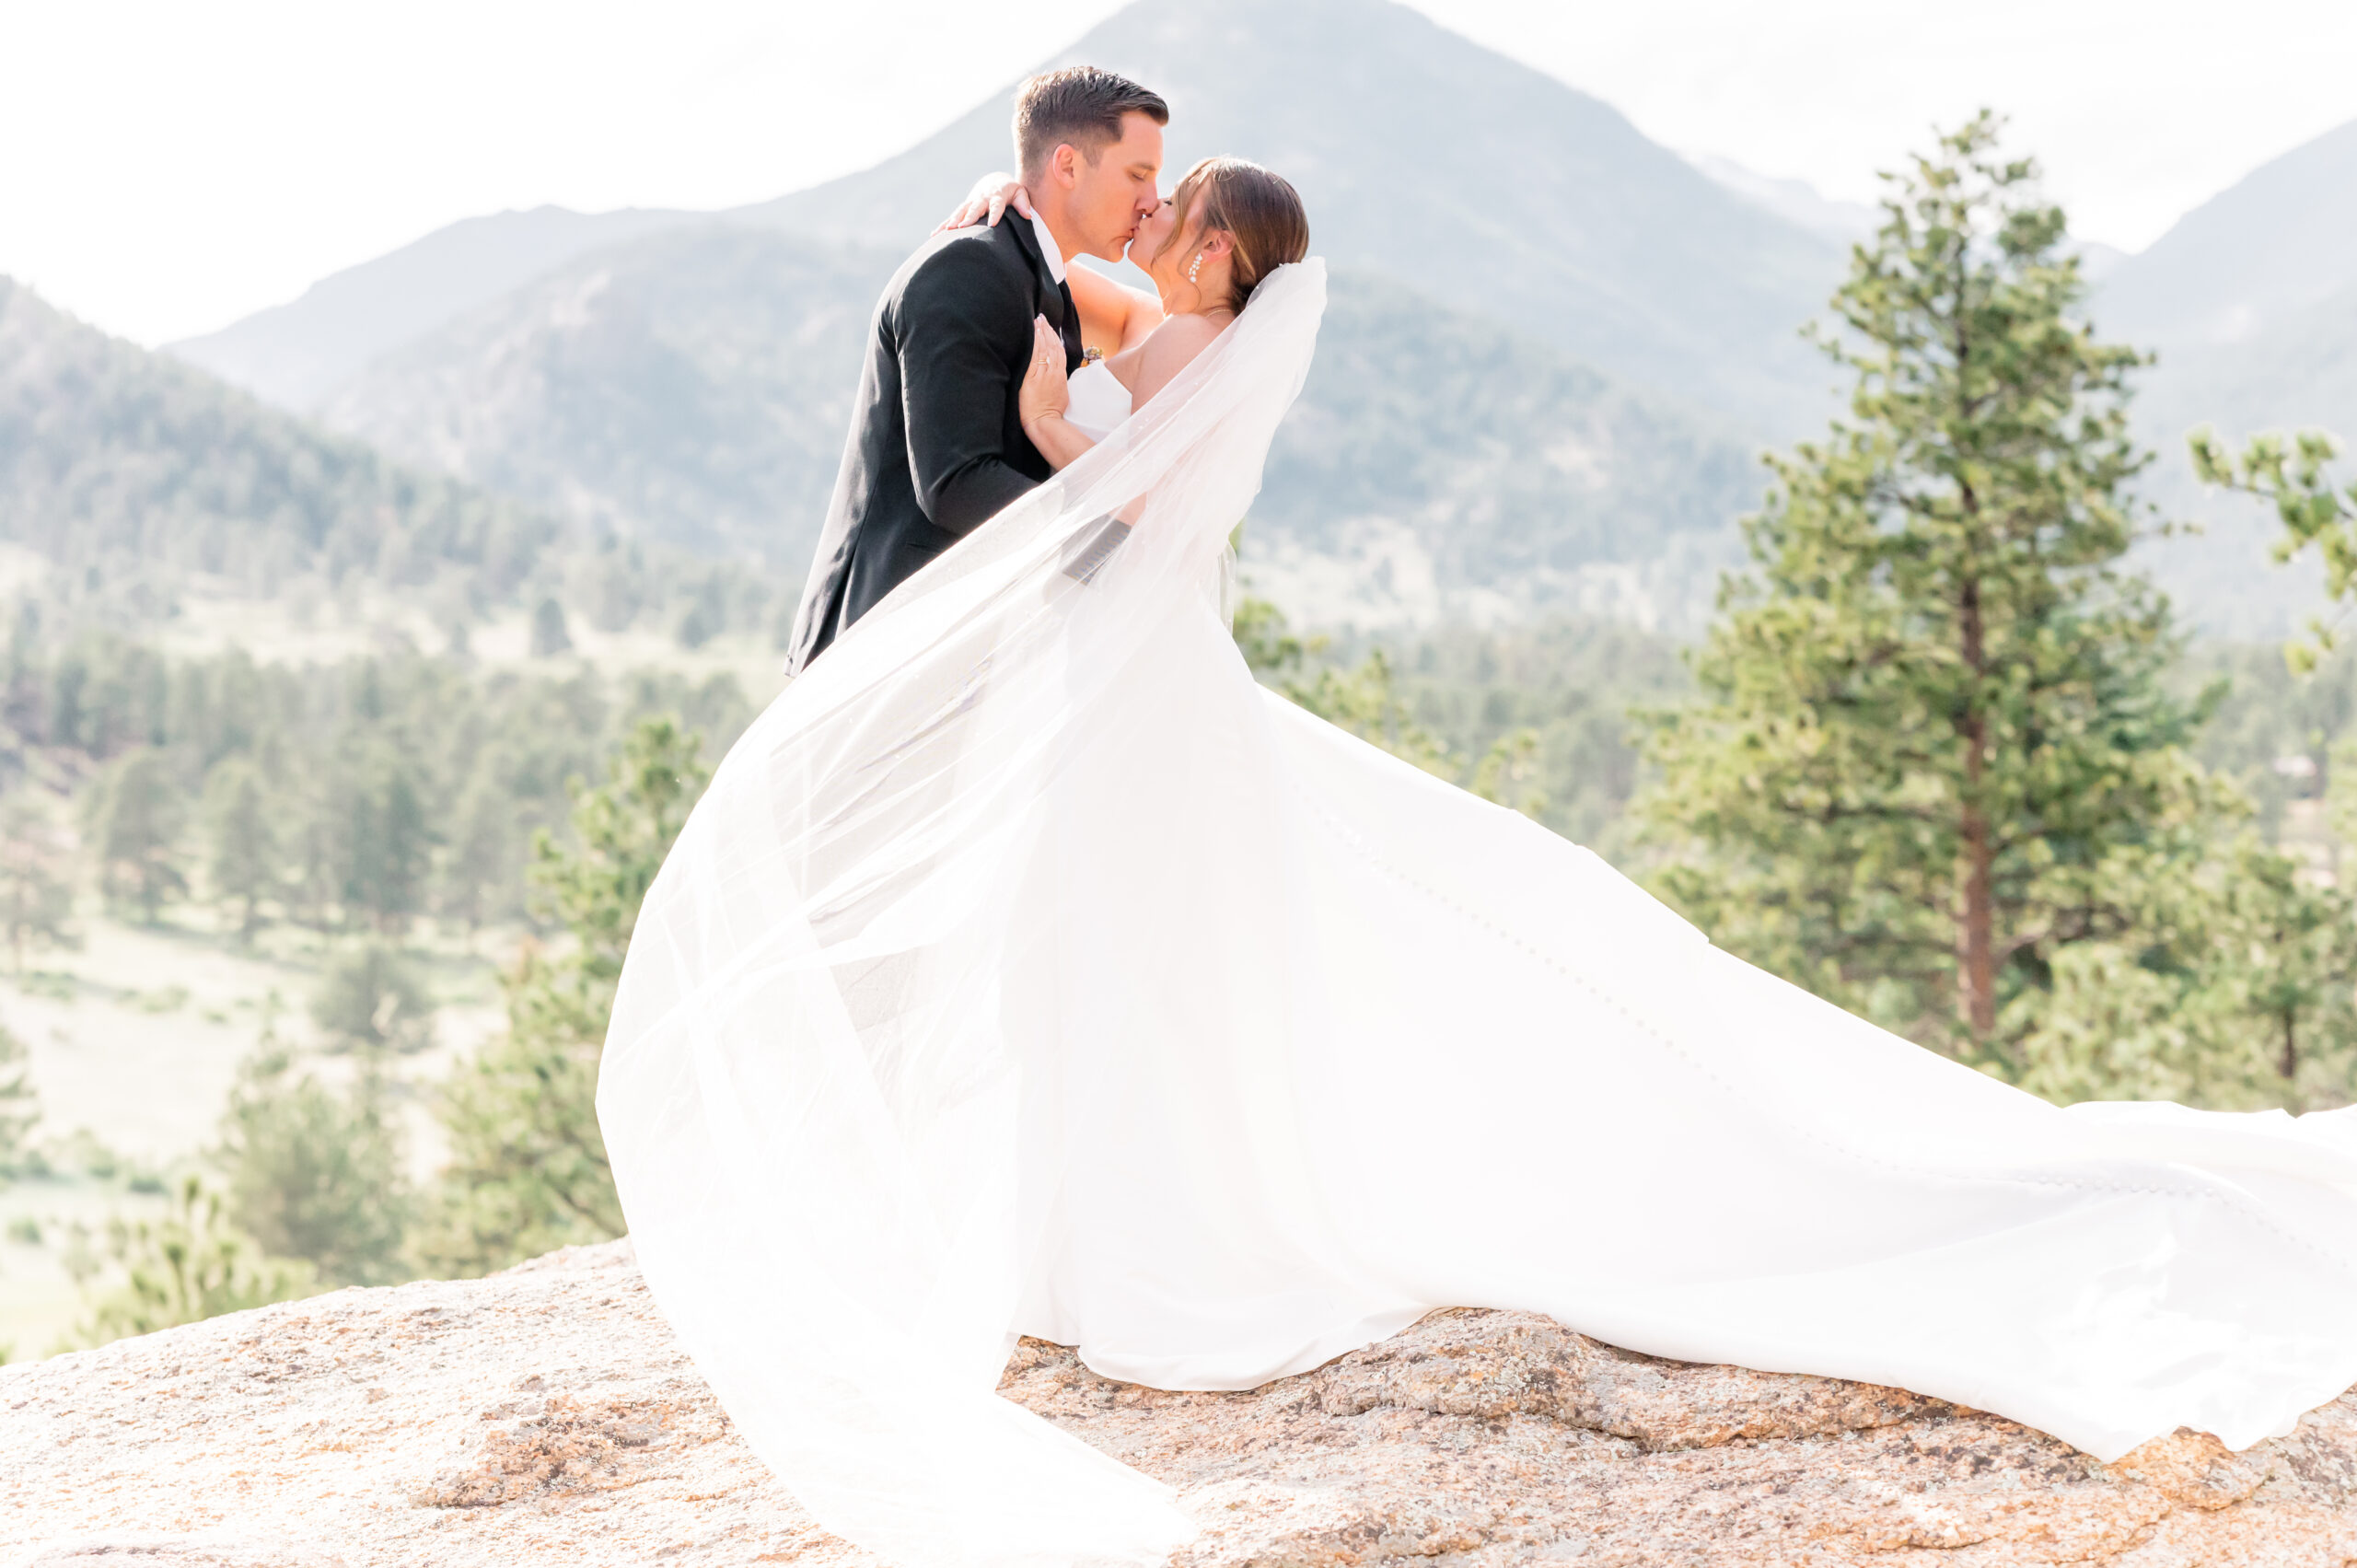 Estes Park Wedding at The Boulders | Britni Girard Photography - Estes Park Wedding Photographer - Colorado wedding photographer and videographer - Christine Burton Events - Summer garden wedding in the Rocky Mountains with Taylor Swift Wedding Themes